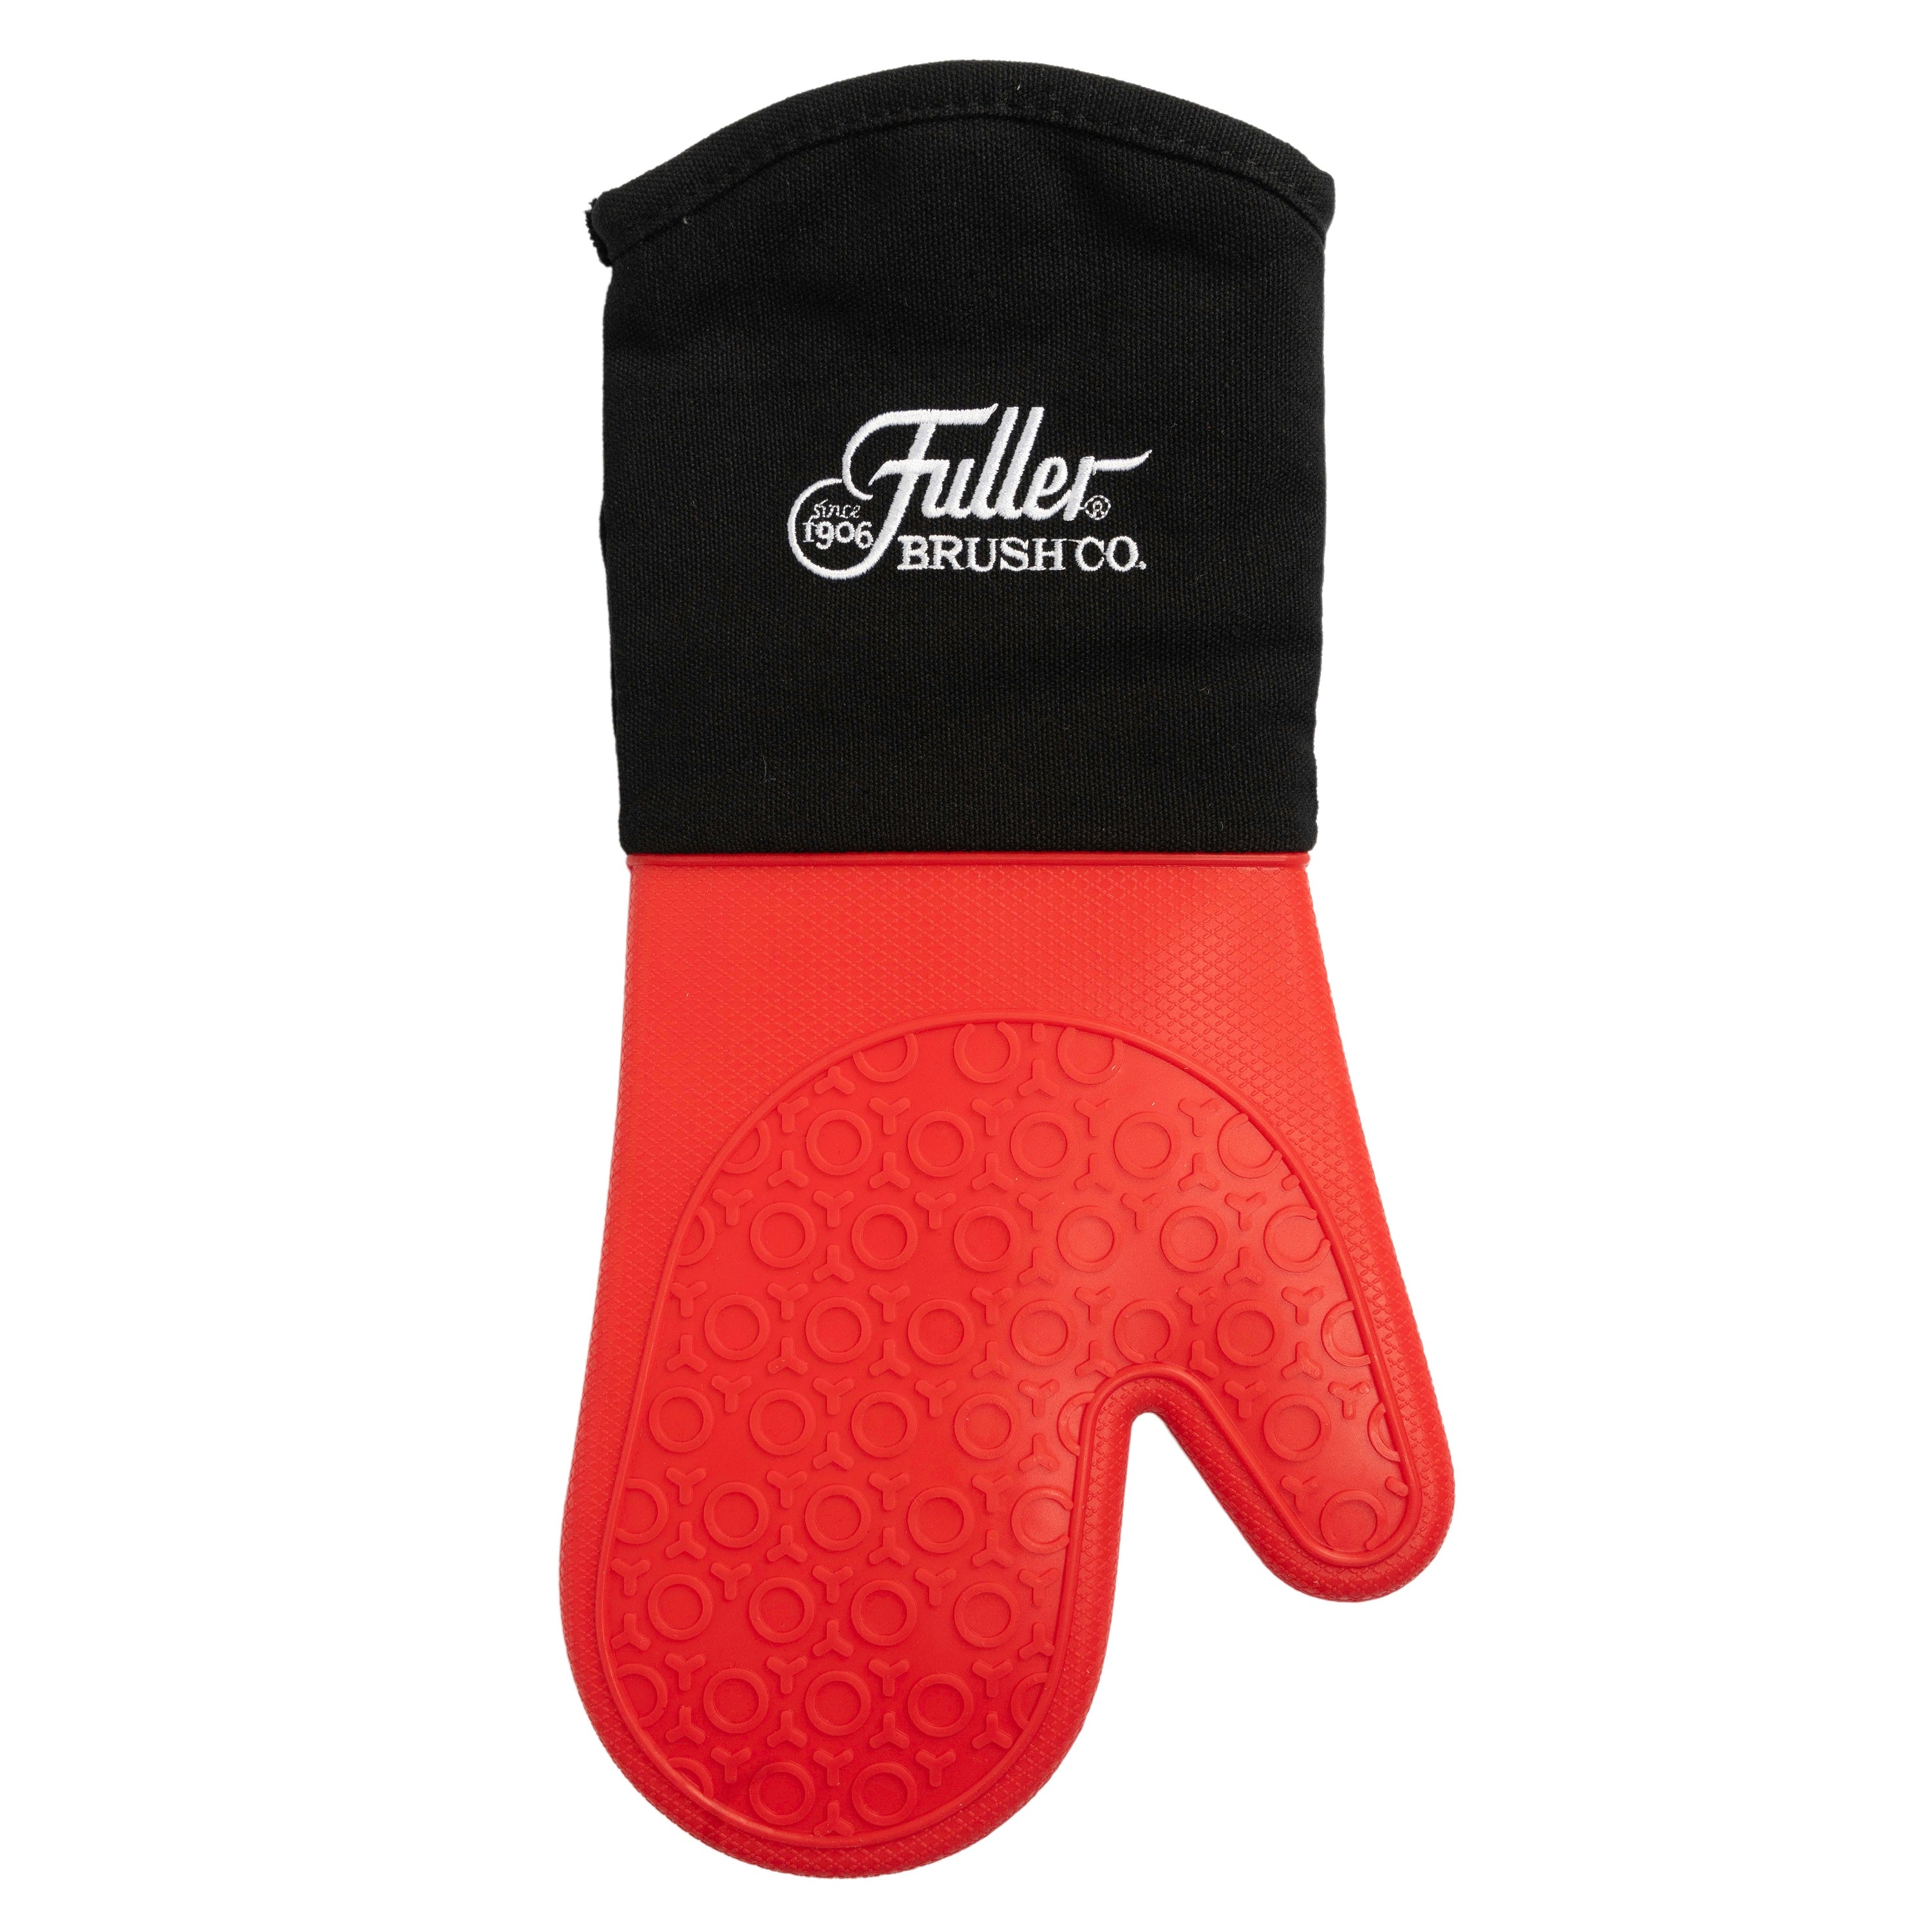 Fuller Silicone Oven Glove